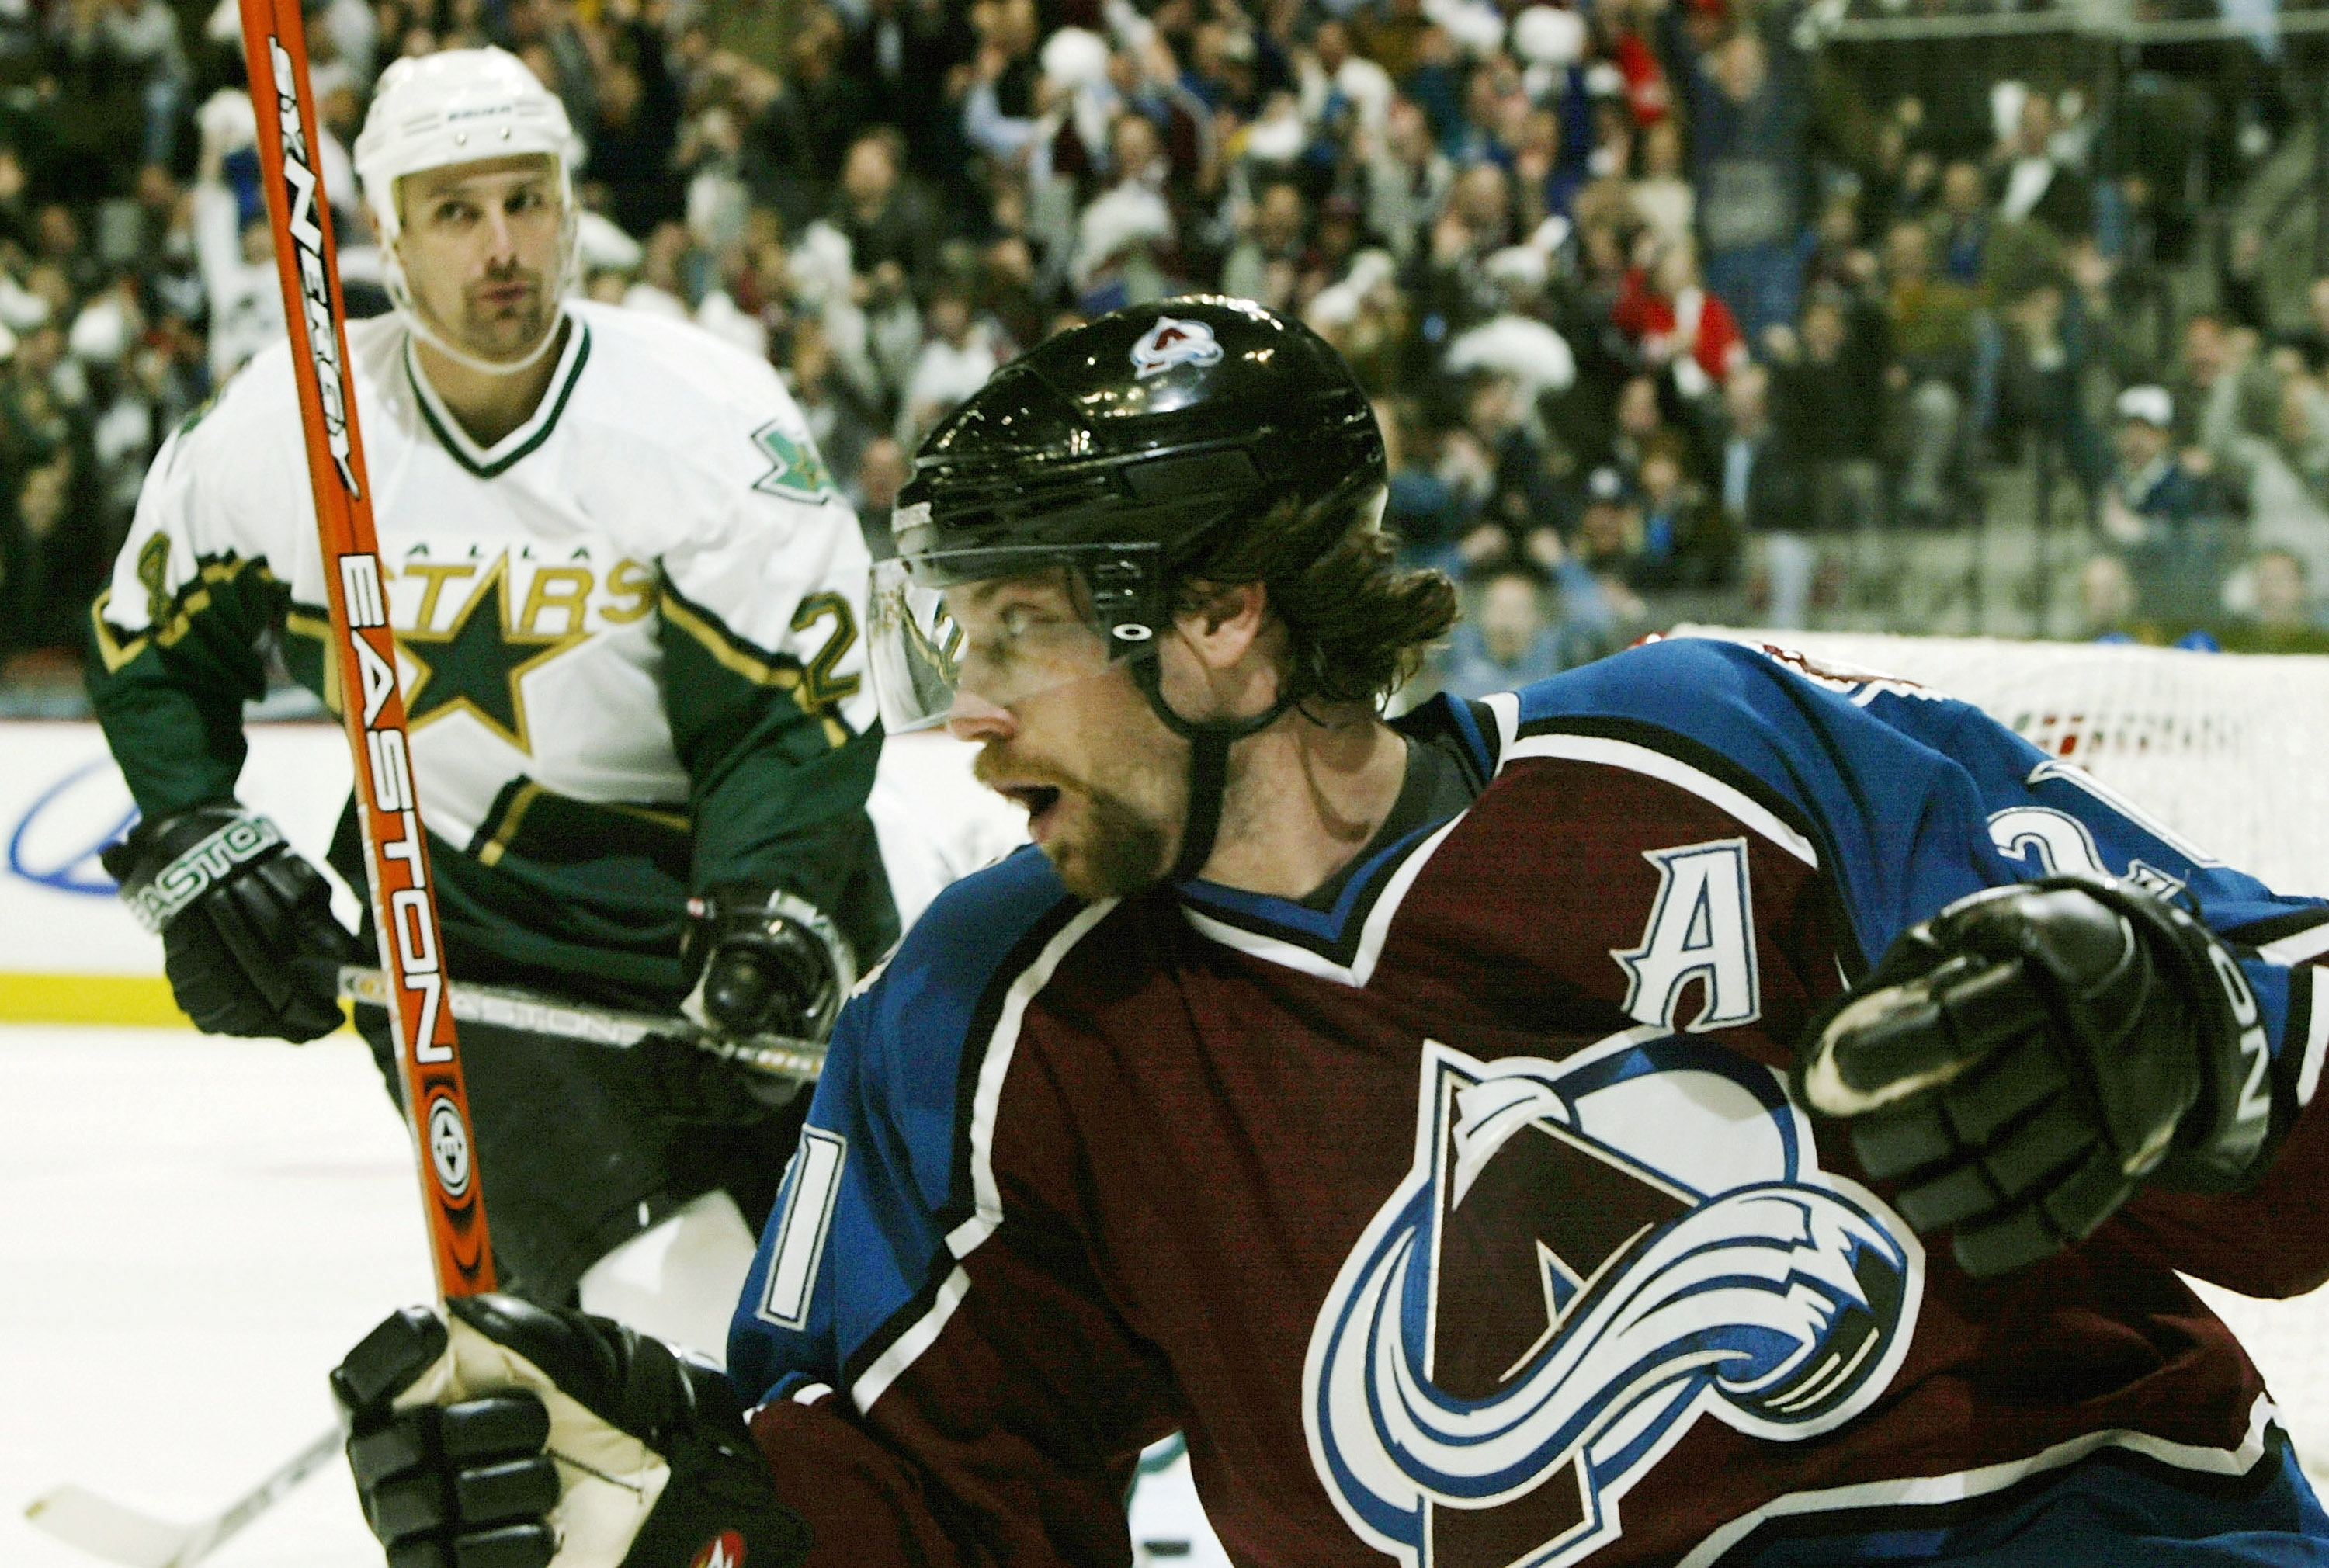 Peter Forsberg to return to NHL, Colorado Avalanche – The Denver Post